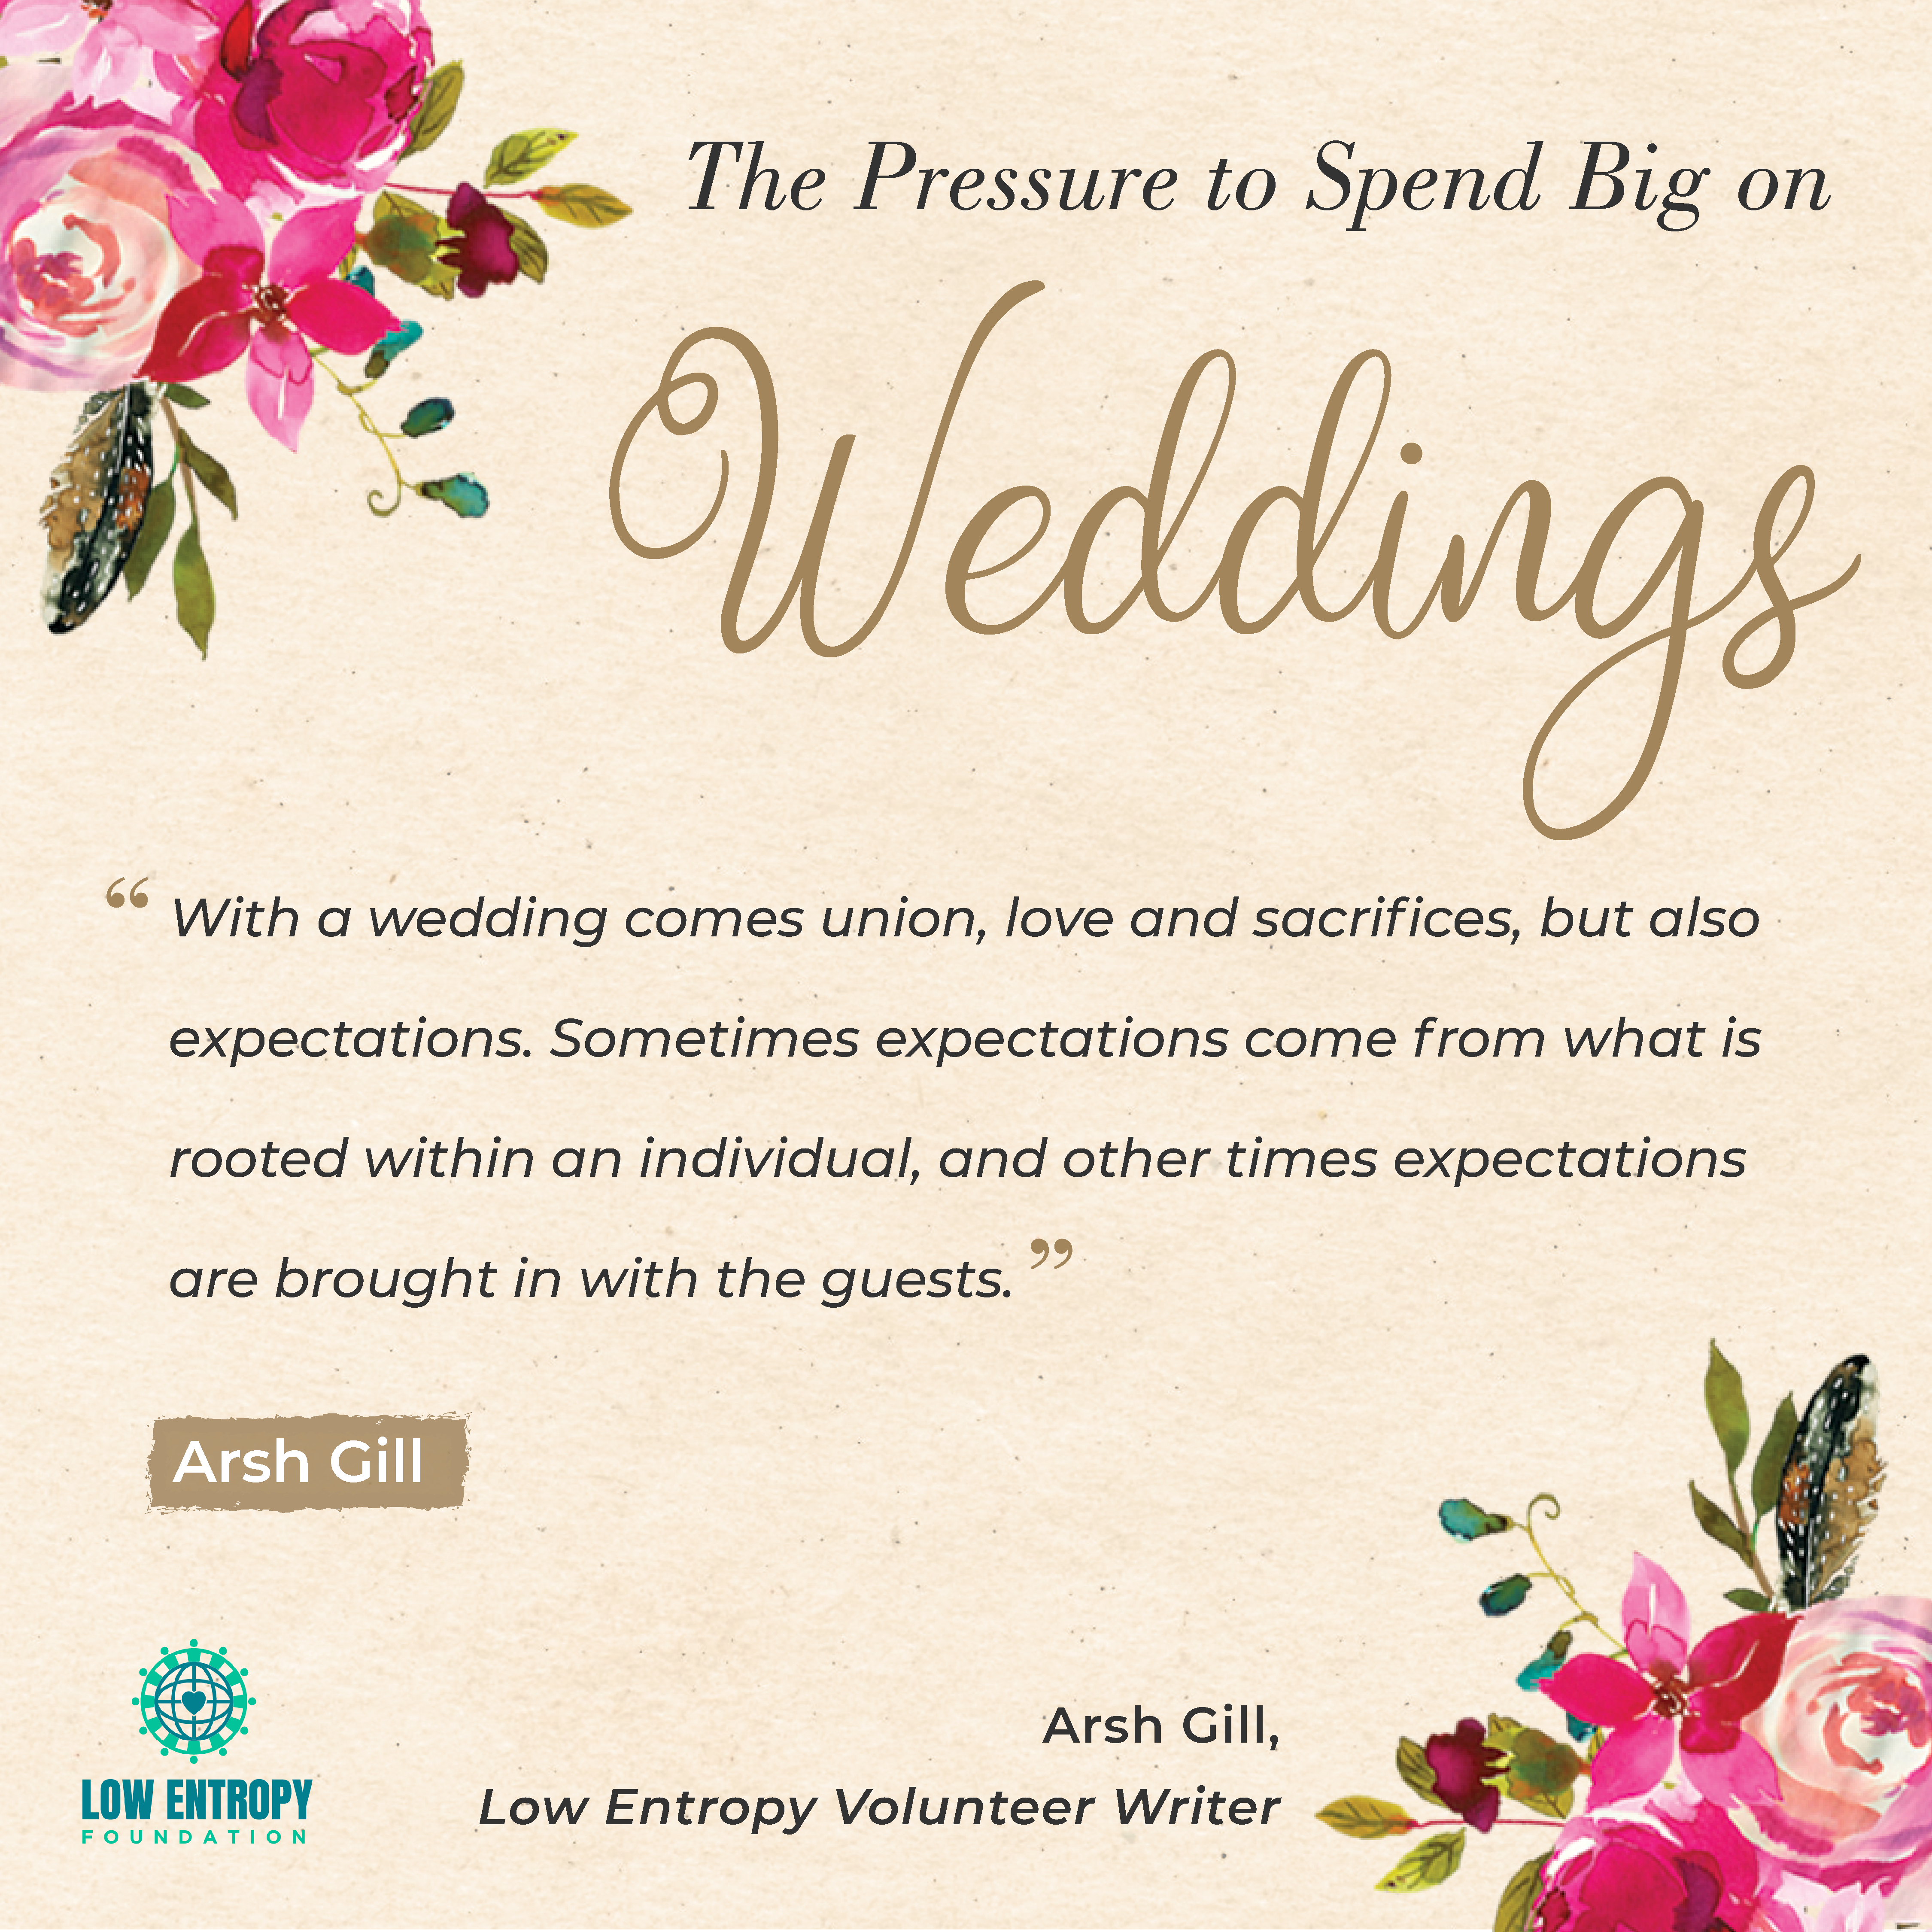 The Pressure to Spend Big on Weddings